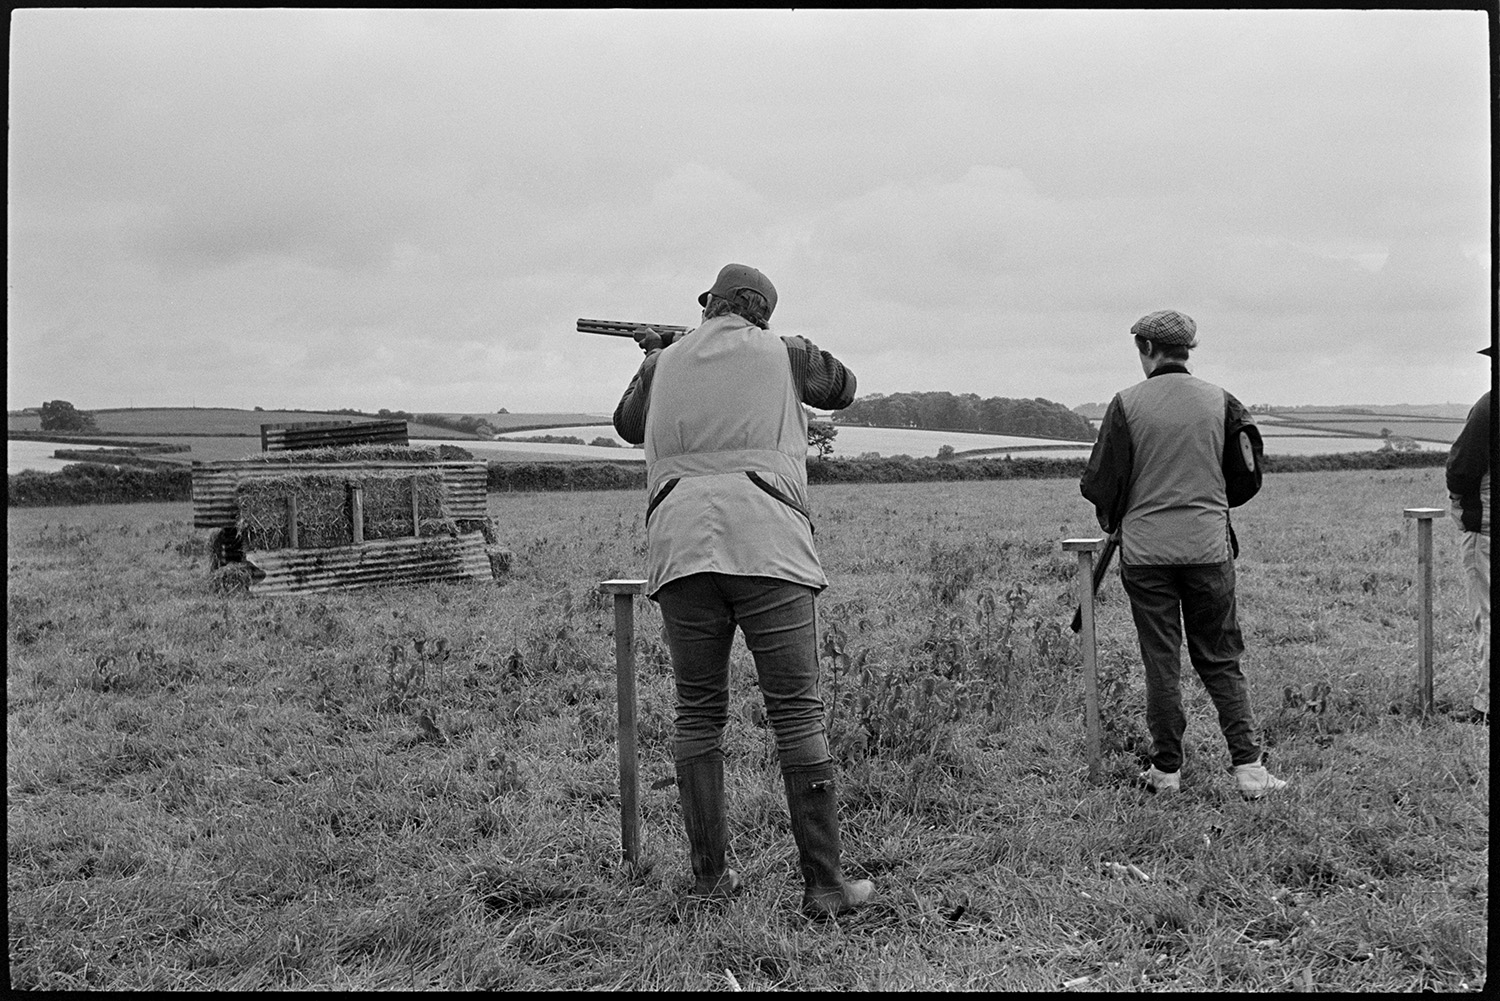 Village Club Day, sports, teas, clay pigeon shoot, committee in discussion.
[A clay pigeon shoot in a field at the Village Club Day in Chawleigh. One man is taking aim with a gun, and another is standing alongside at the next post. There are fields and woodland in the background.]